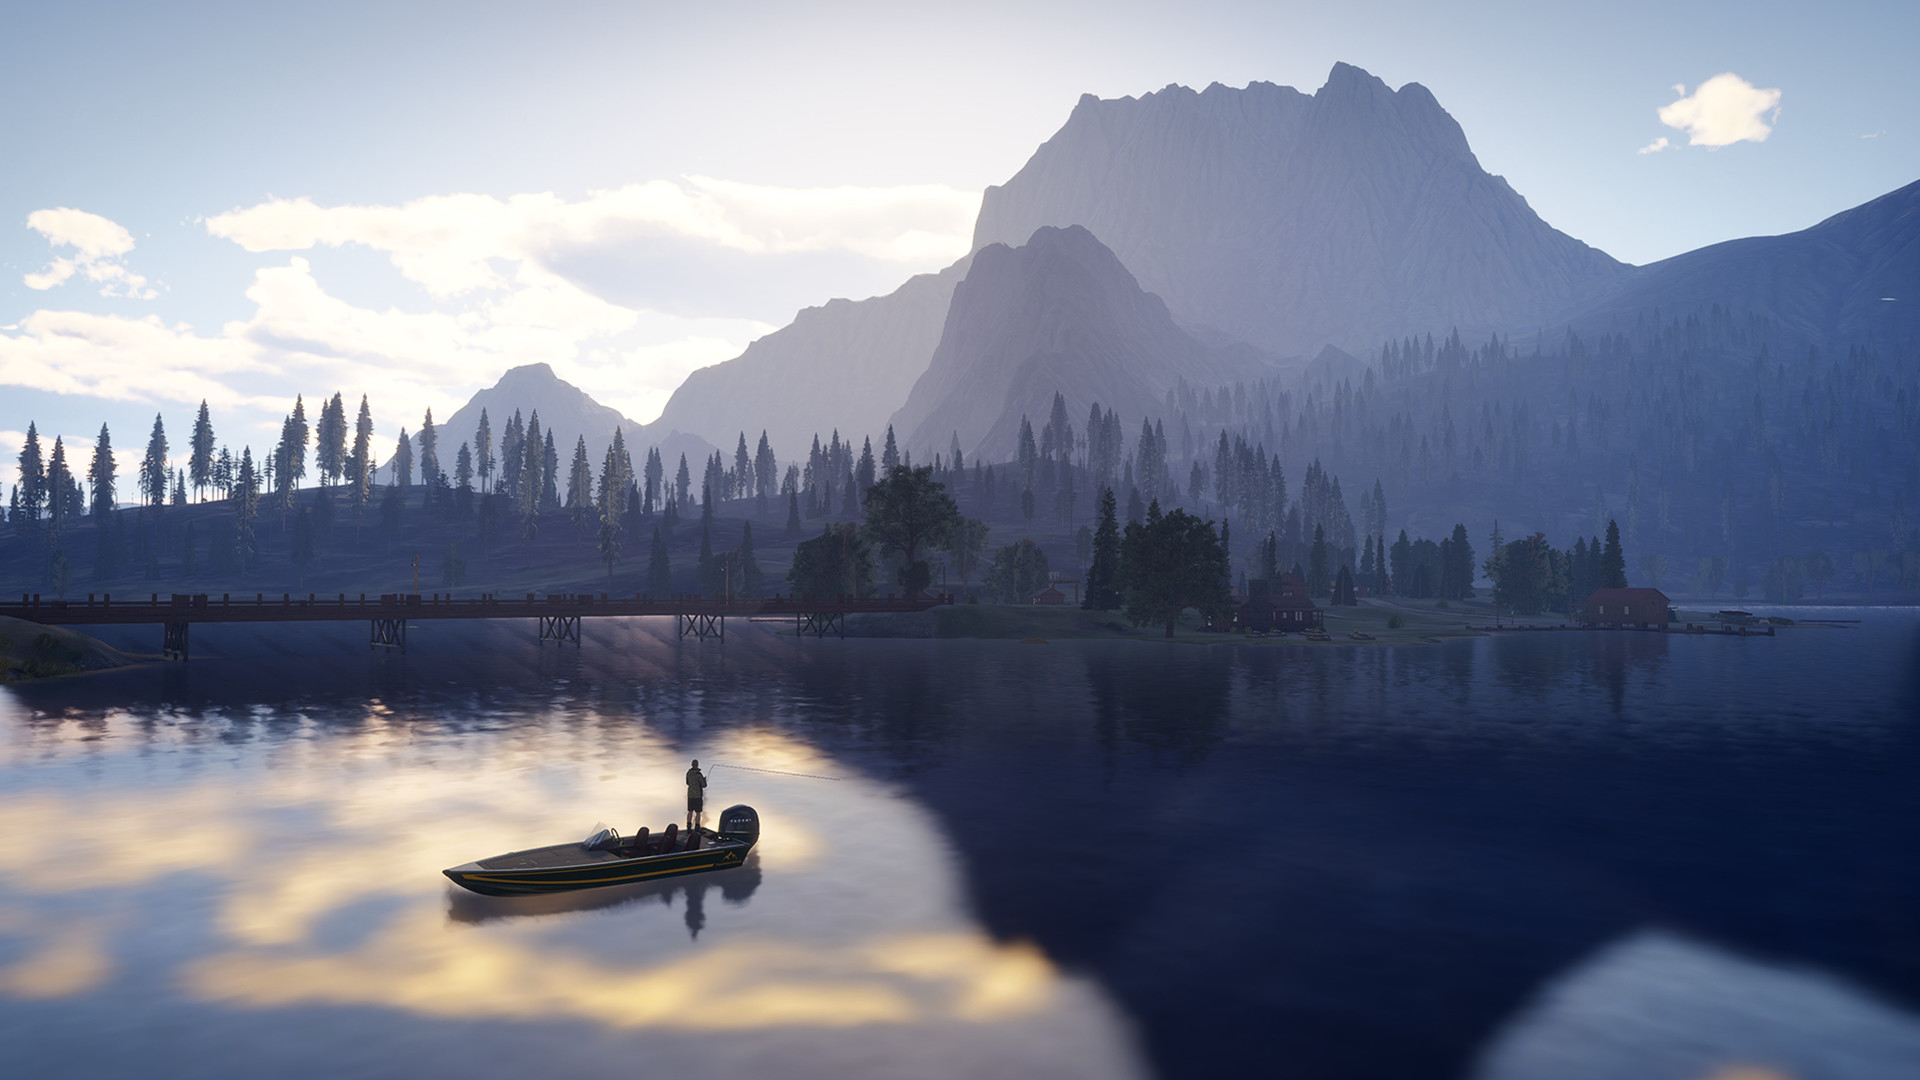 Call of the Wild: The Angler Free Download